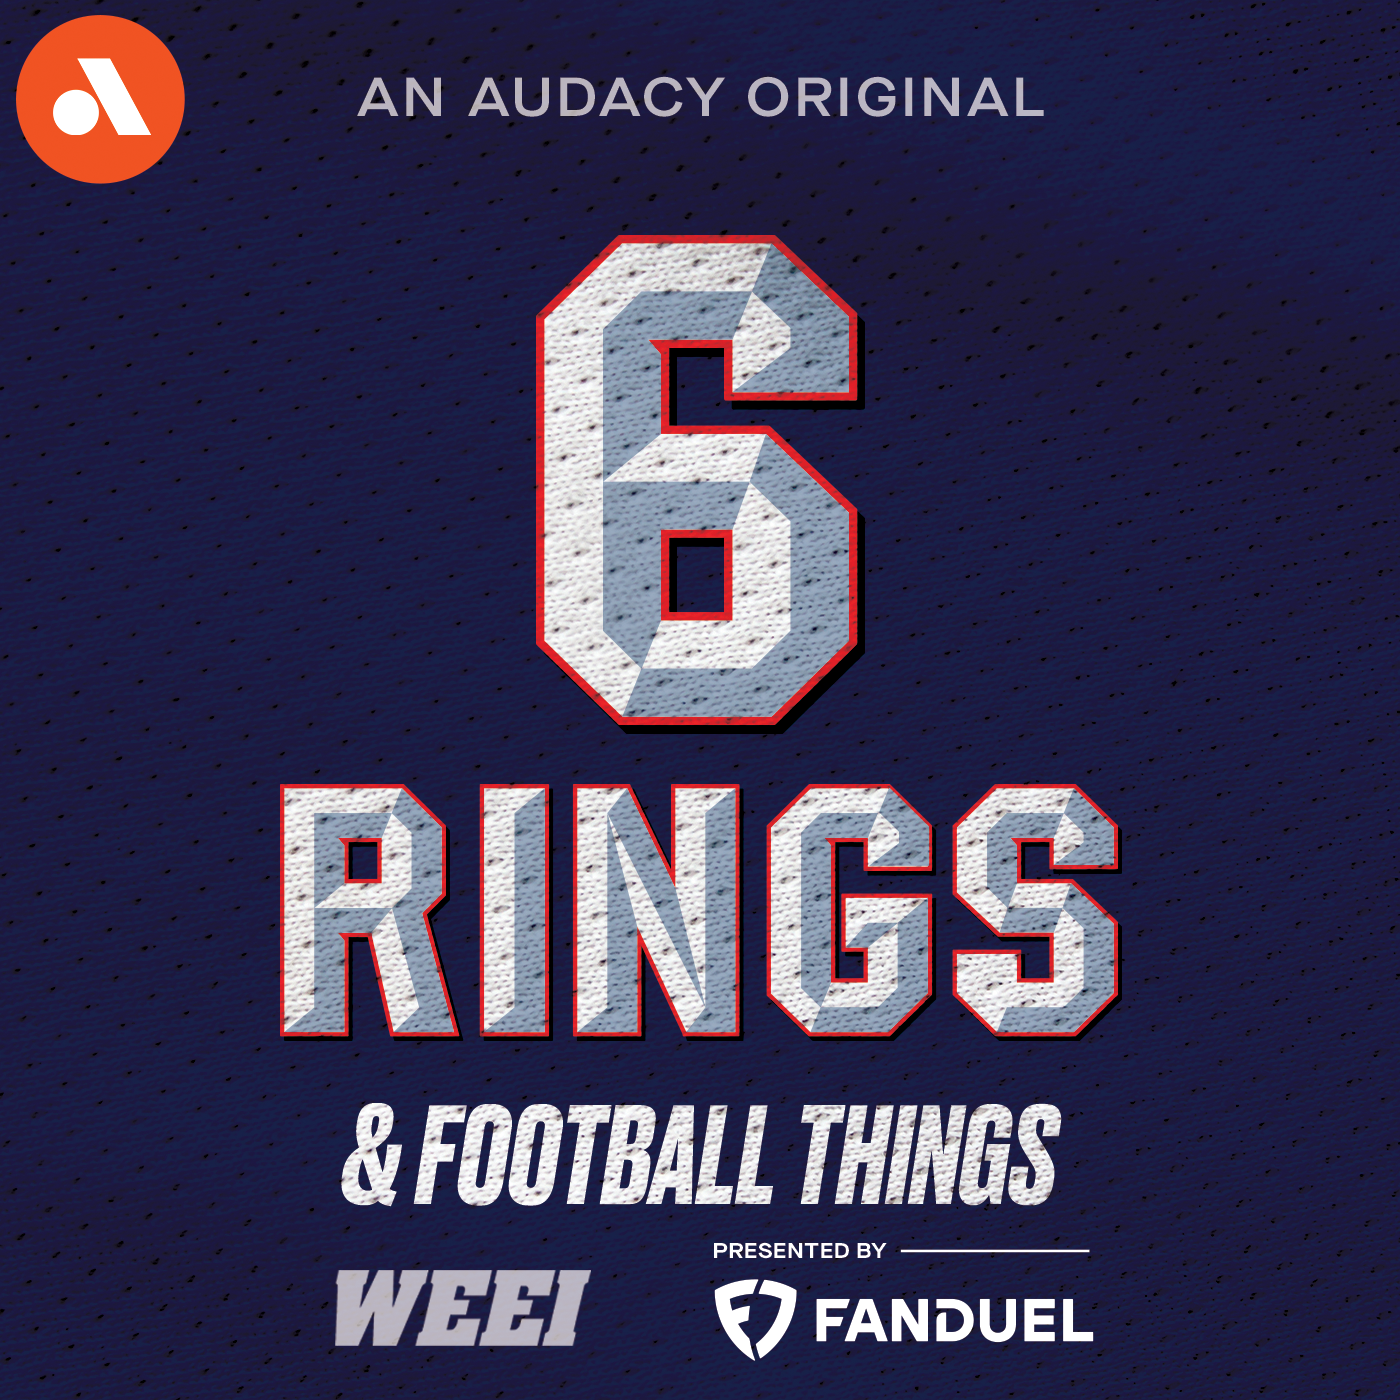 Today is the day to give Mac Jones his flowers | '6 Rings & Football Things'